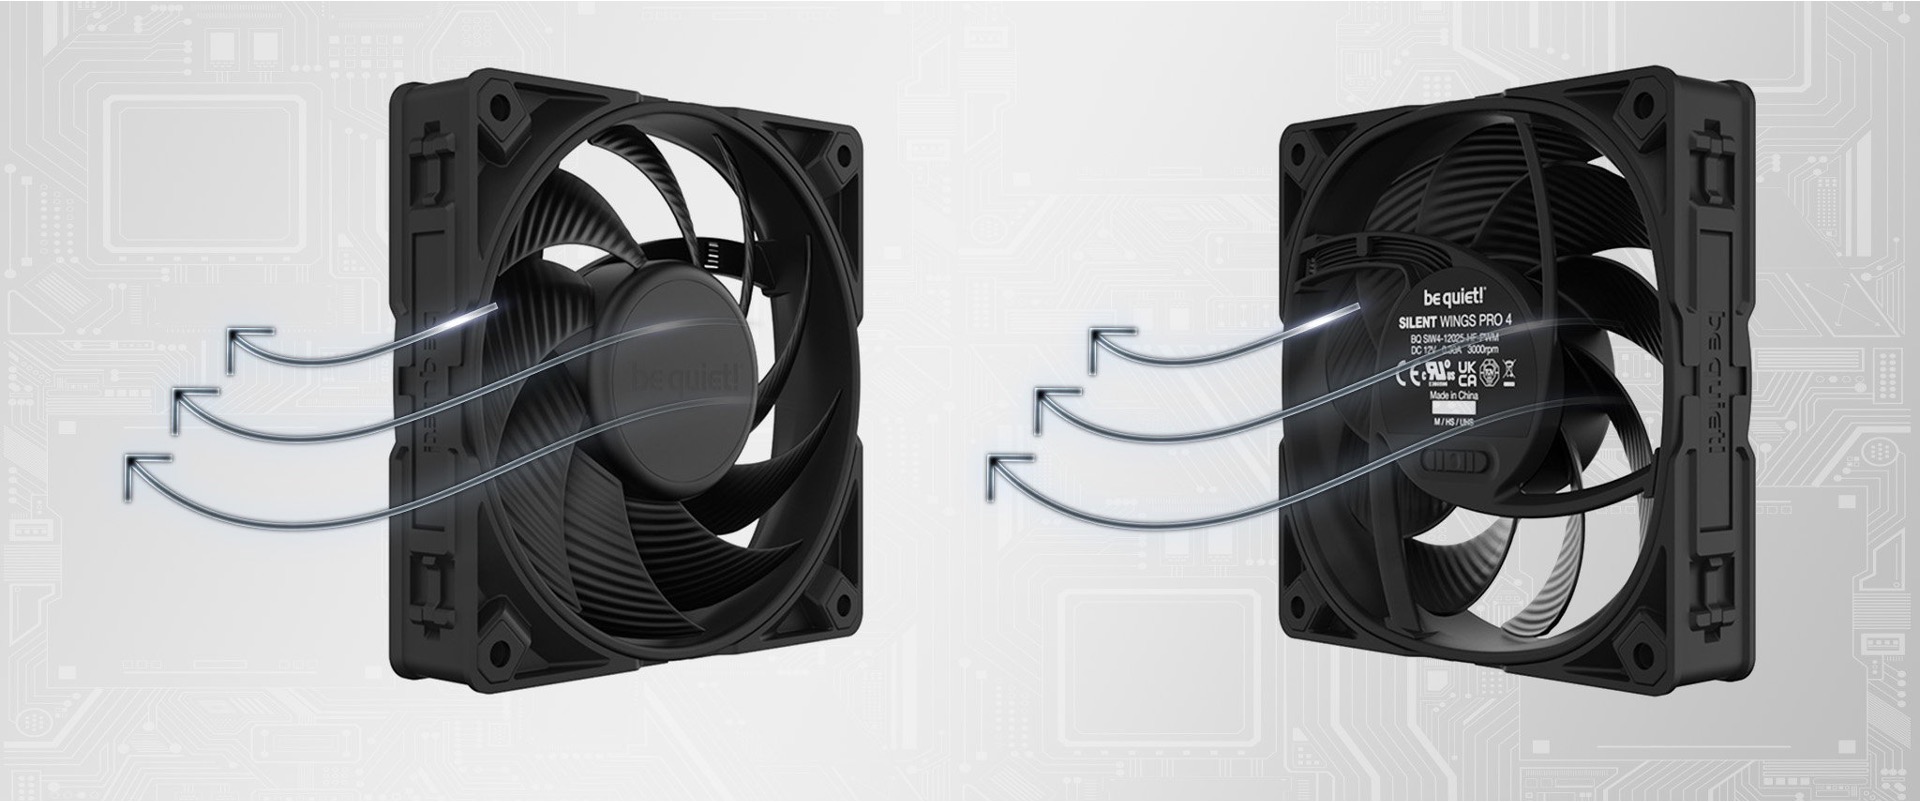 CPU Case Fan: How To Reverse Flow Direction